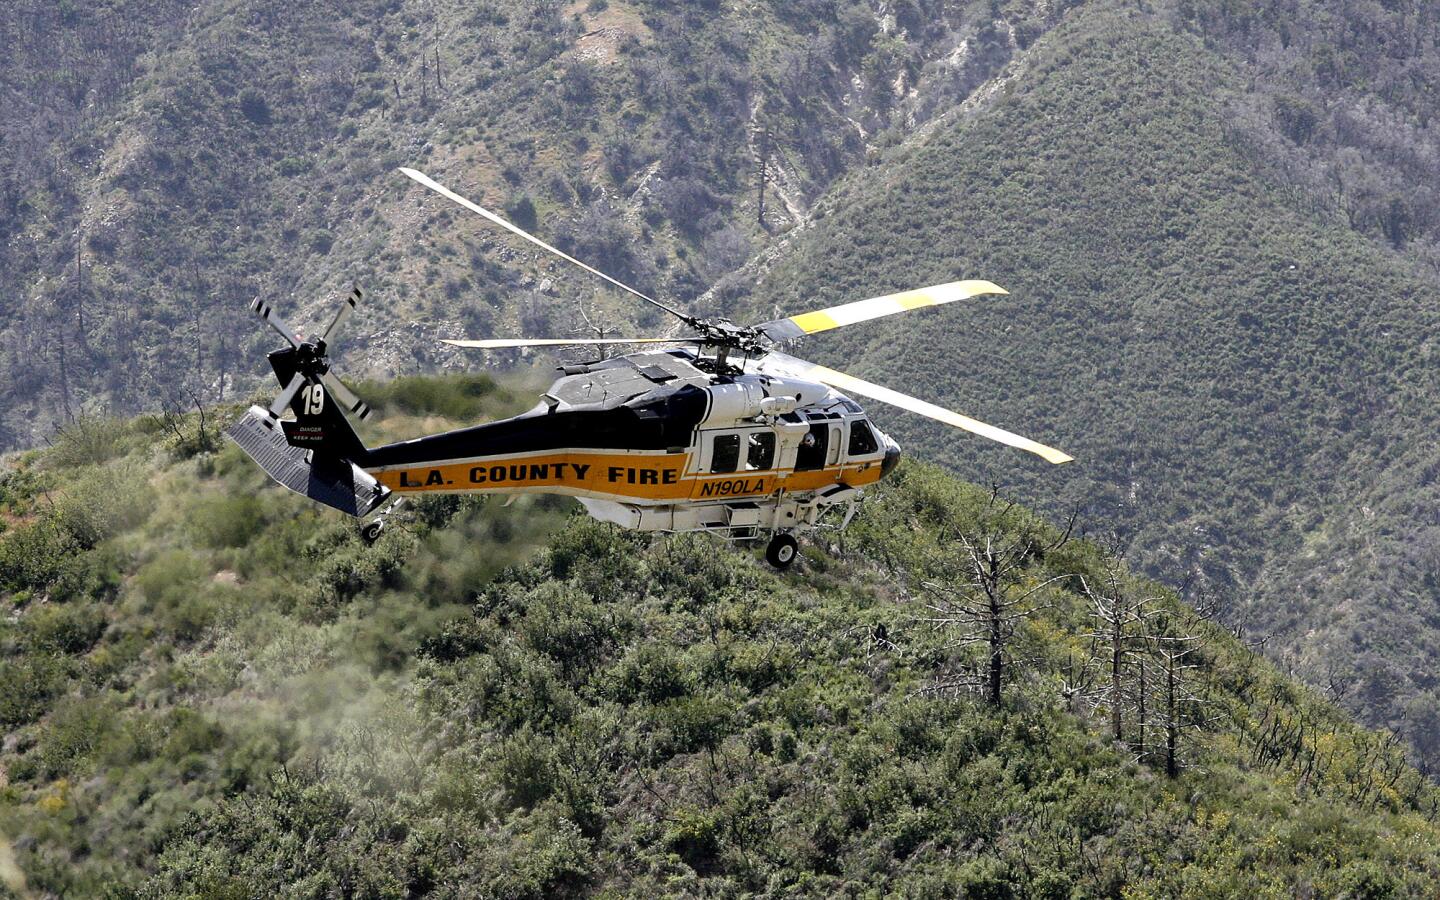 Photo Gallery: Vehicle found over the edge in Angeles National Forest